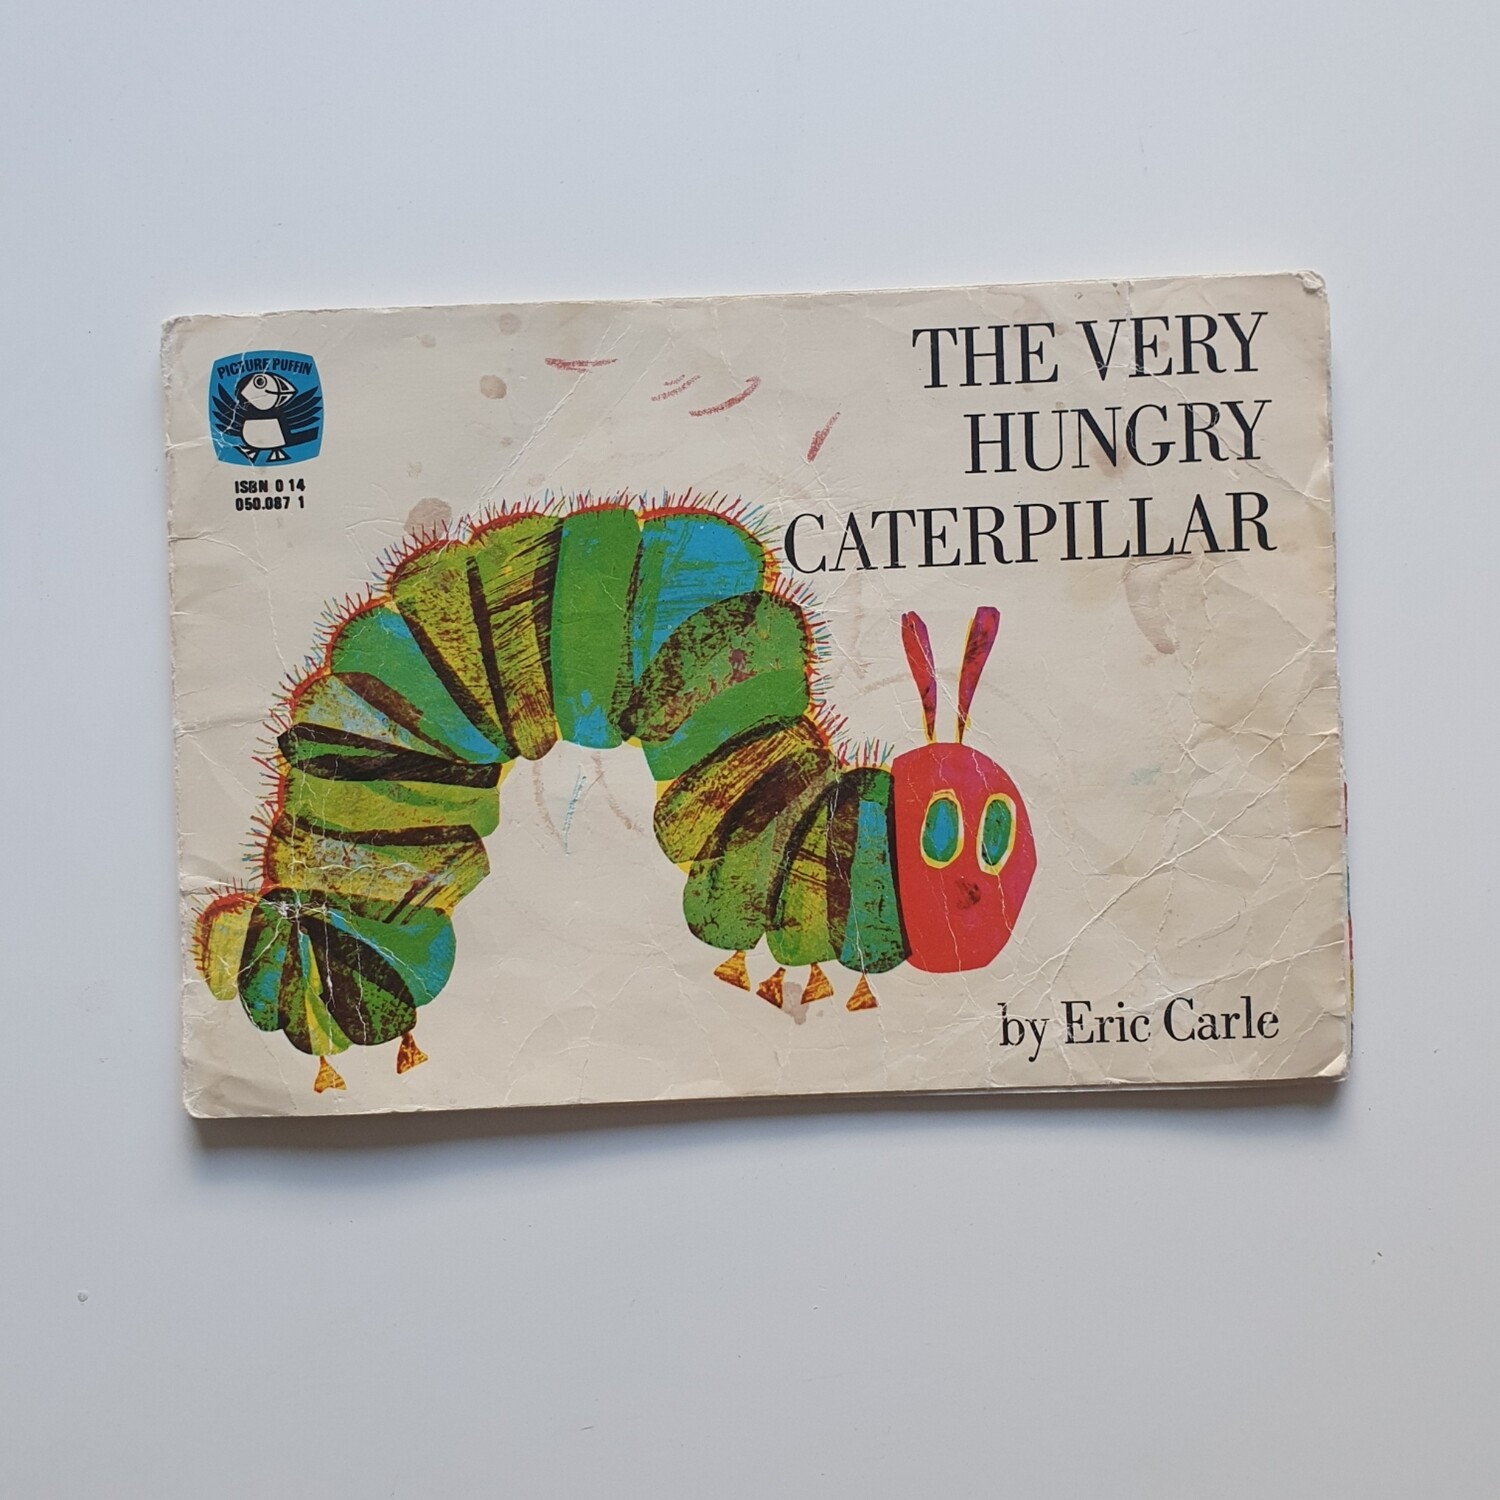 The Very Hungry Caterpillar Notebook - made from a paperback book